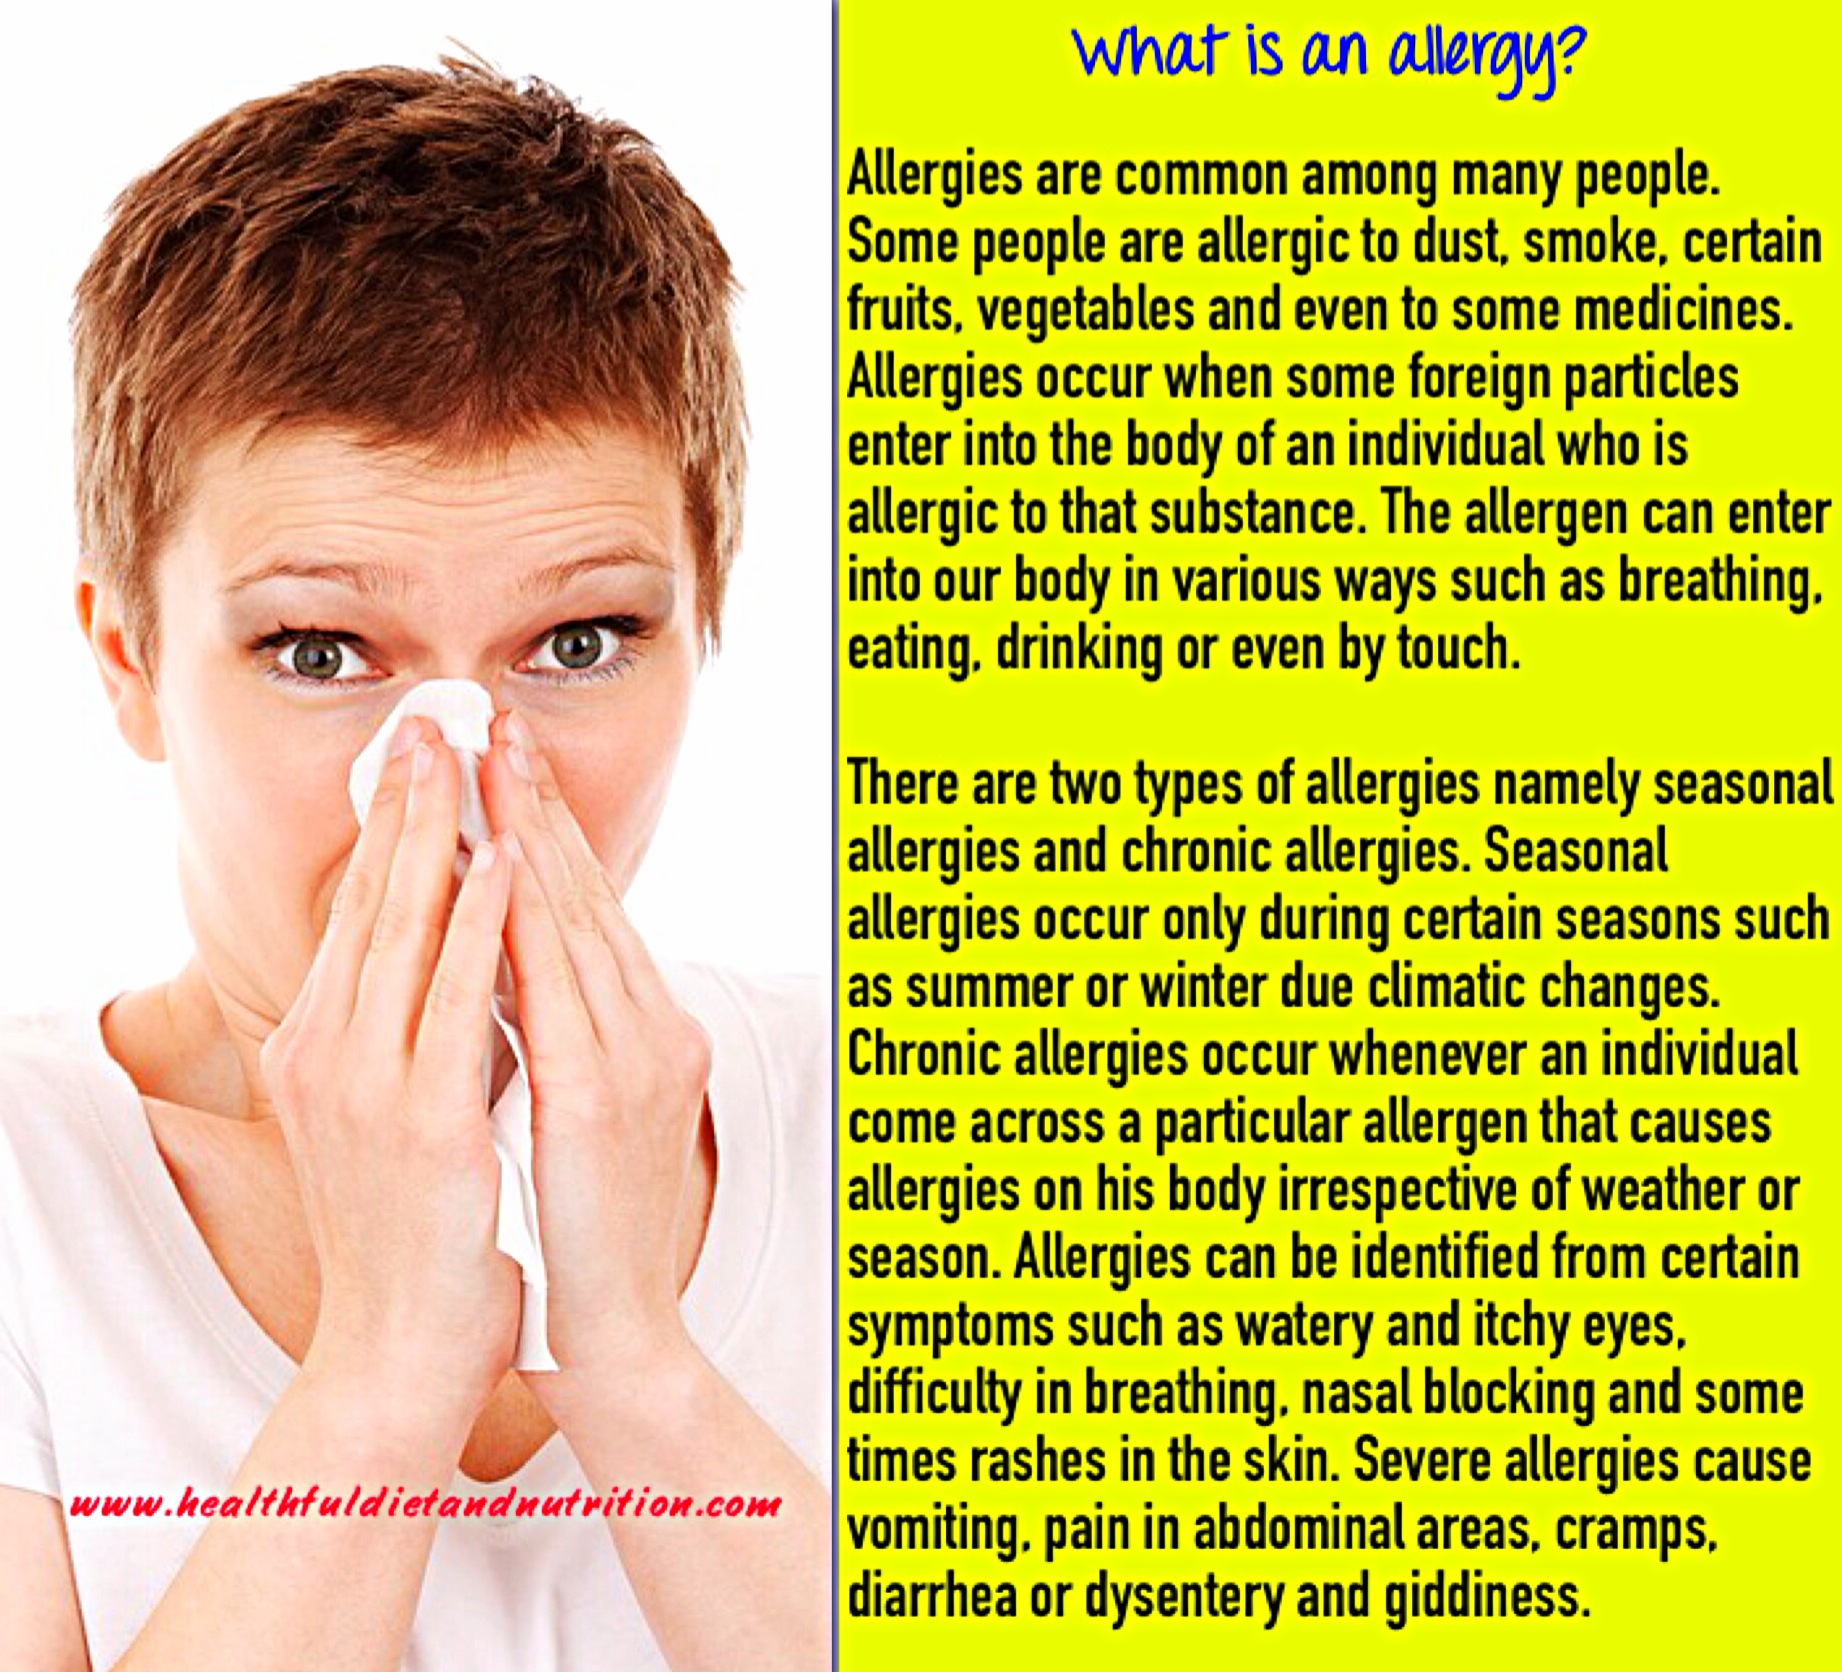 What Is An Allergy?